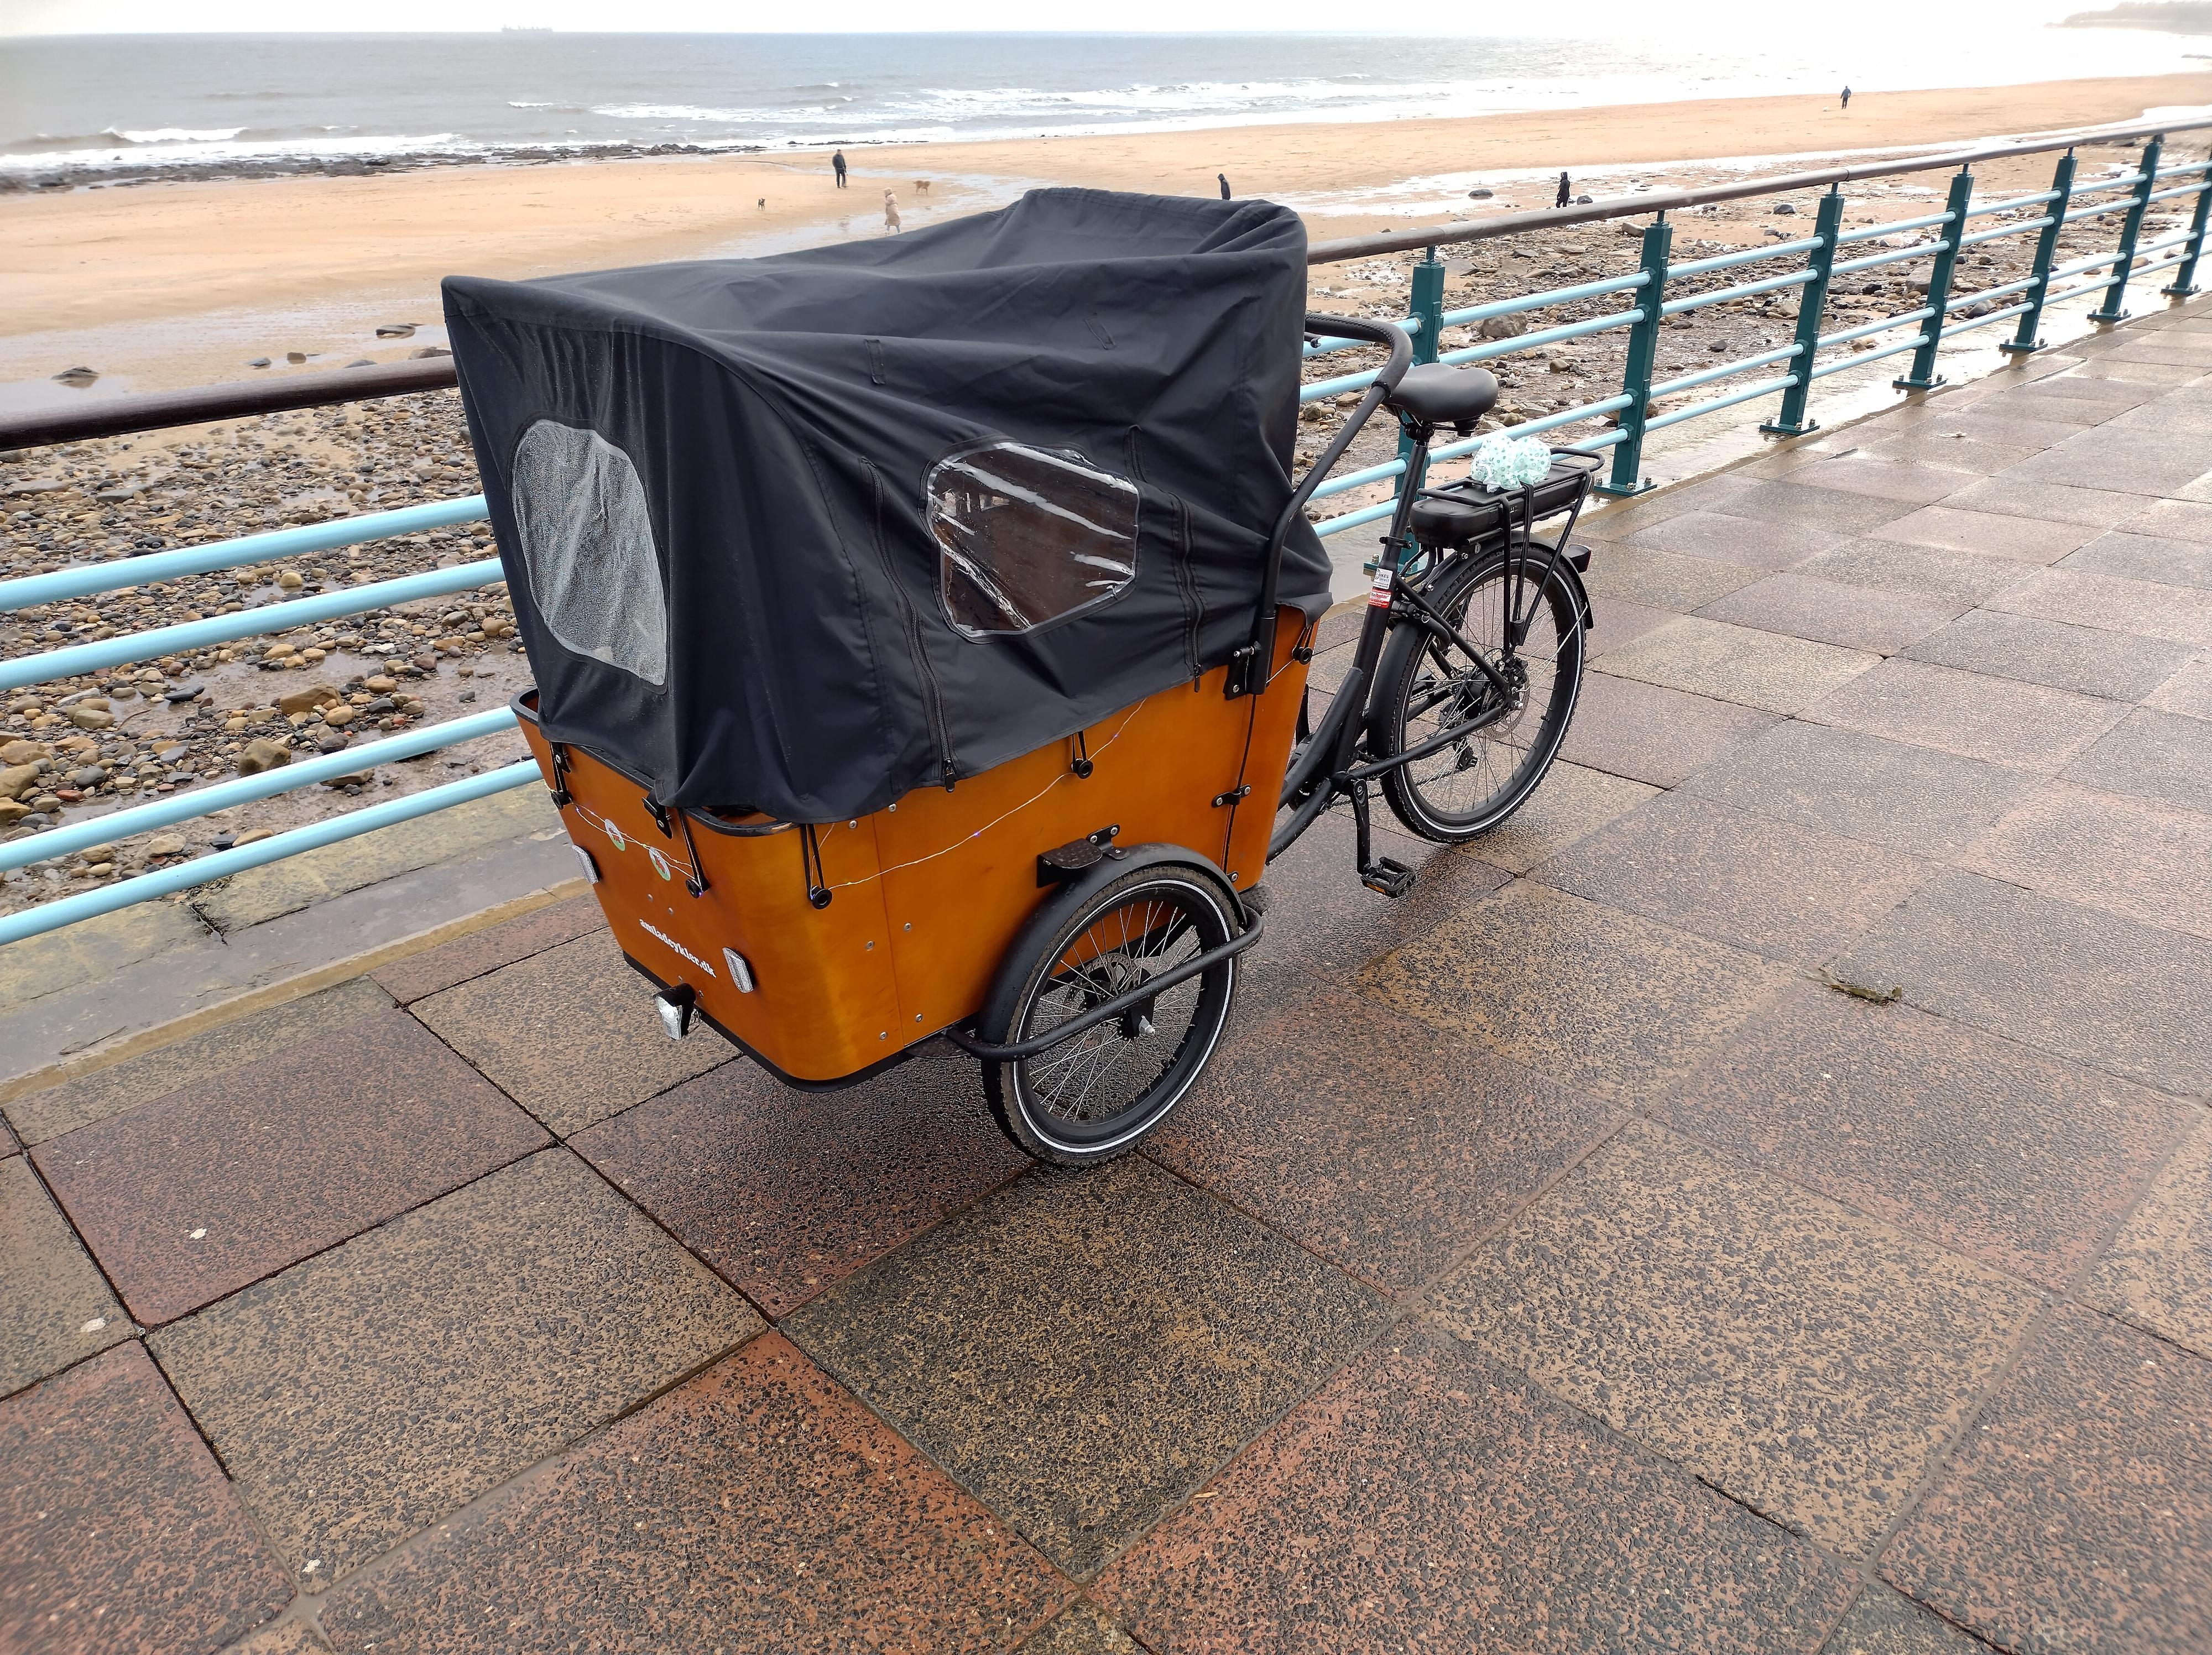 The bike viewed from the side, with the rain cover on. The cover is big and black, with transparent plastic windows on each side.